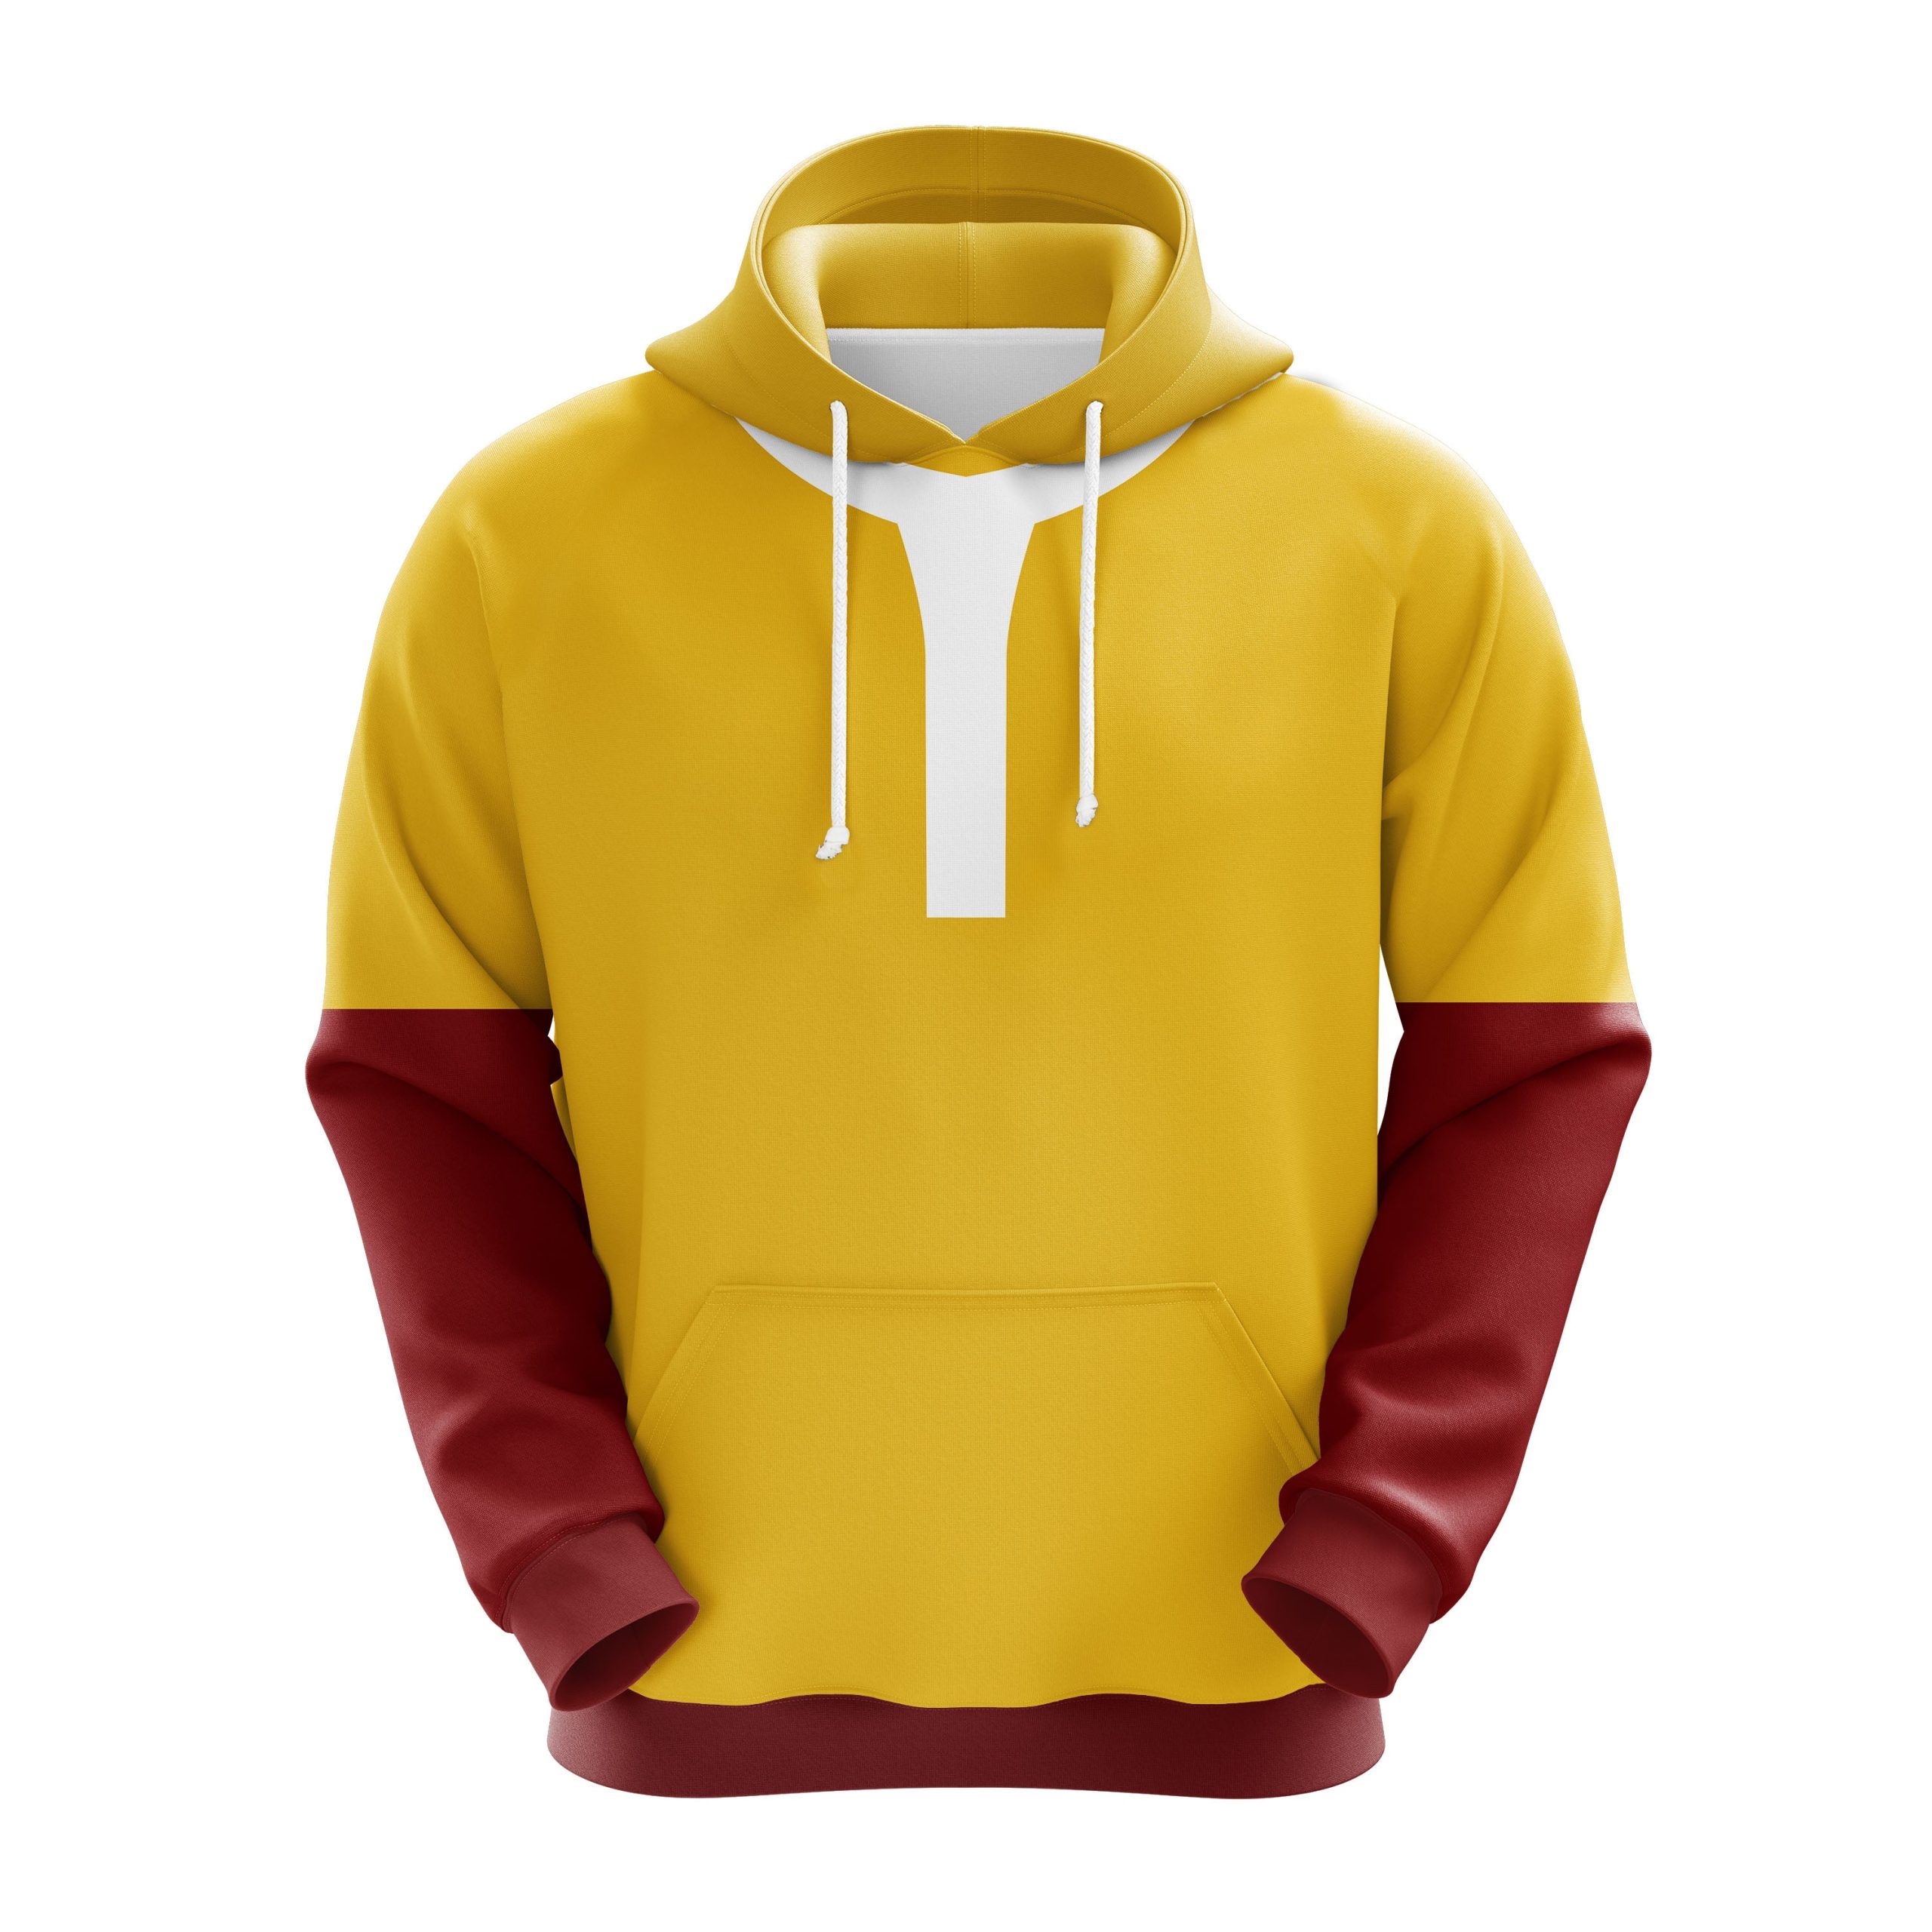 Saitama One Punch Man Outfit Cosplay Anime Hoodie Amazing Gift Idea